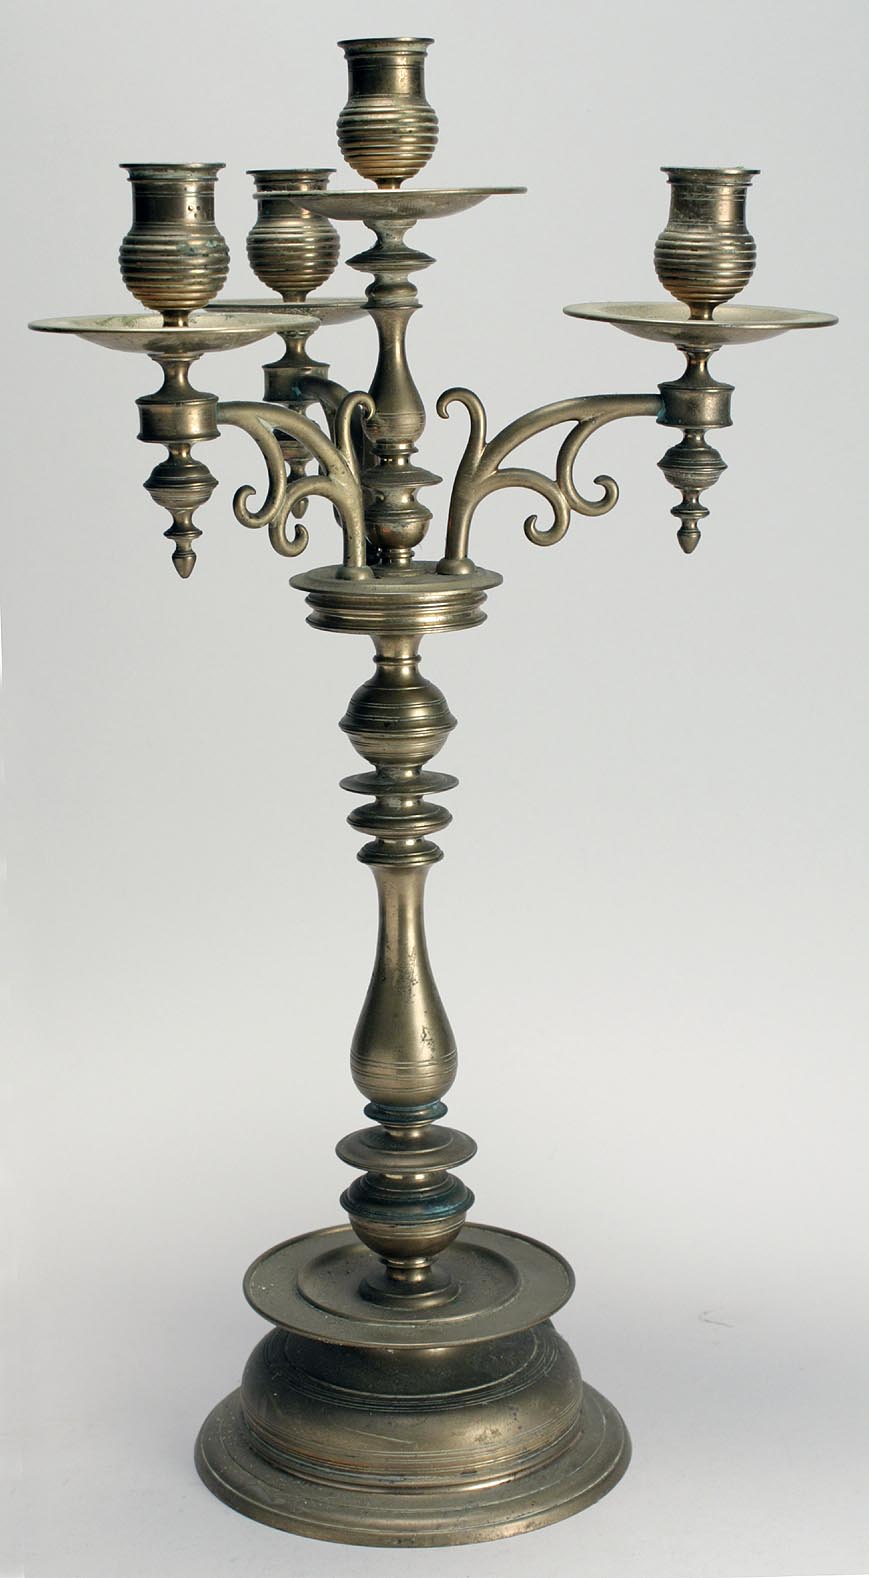 BRASS FOUR-SOCLE CANDELABRUMHeight 21.